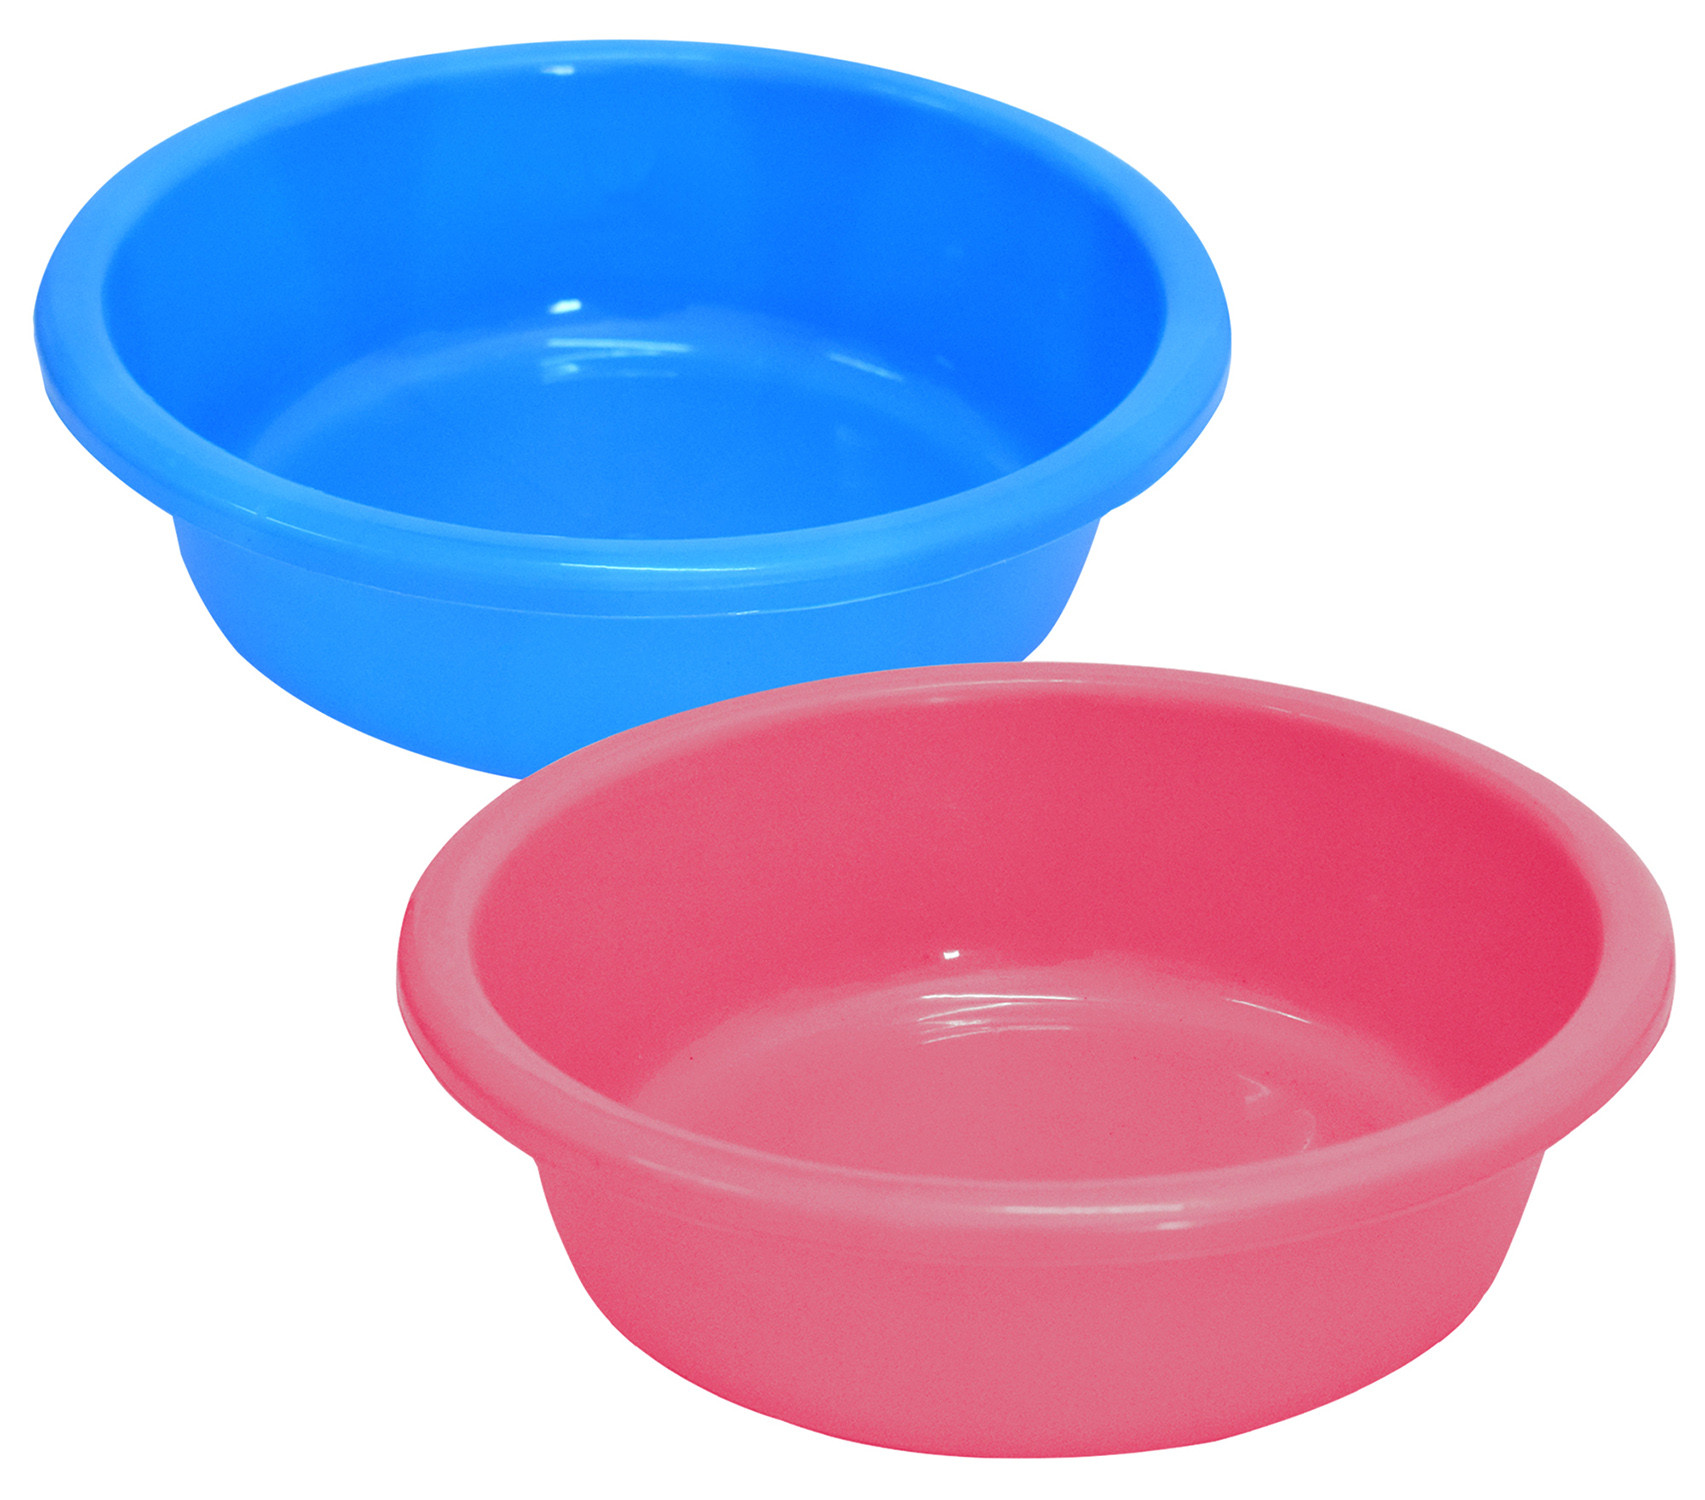 Kuber Industries Multiuses Unbreakable Plastic Knead Dough Basket/Basin Bowl For Home & Kitchen 6 Ltr- Pack of 2 (Blue & Pink)